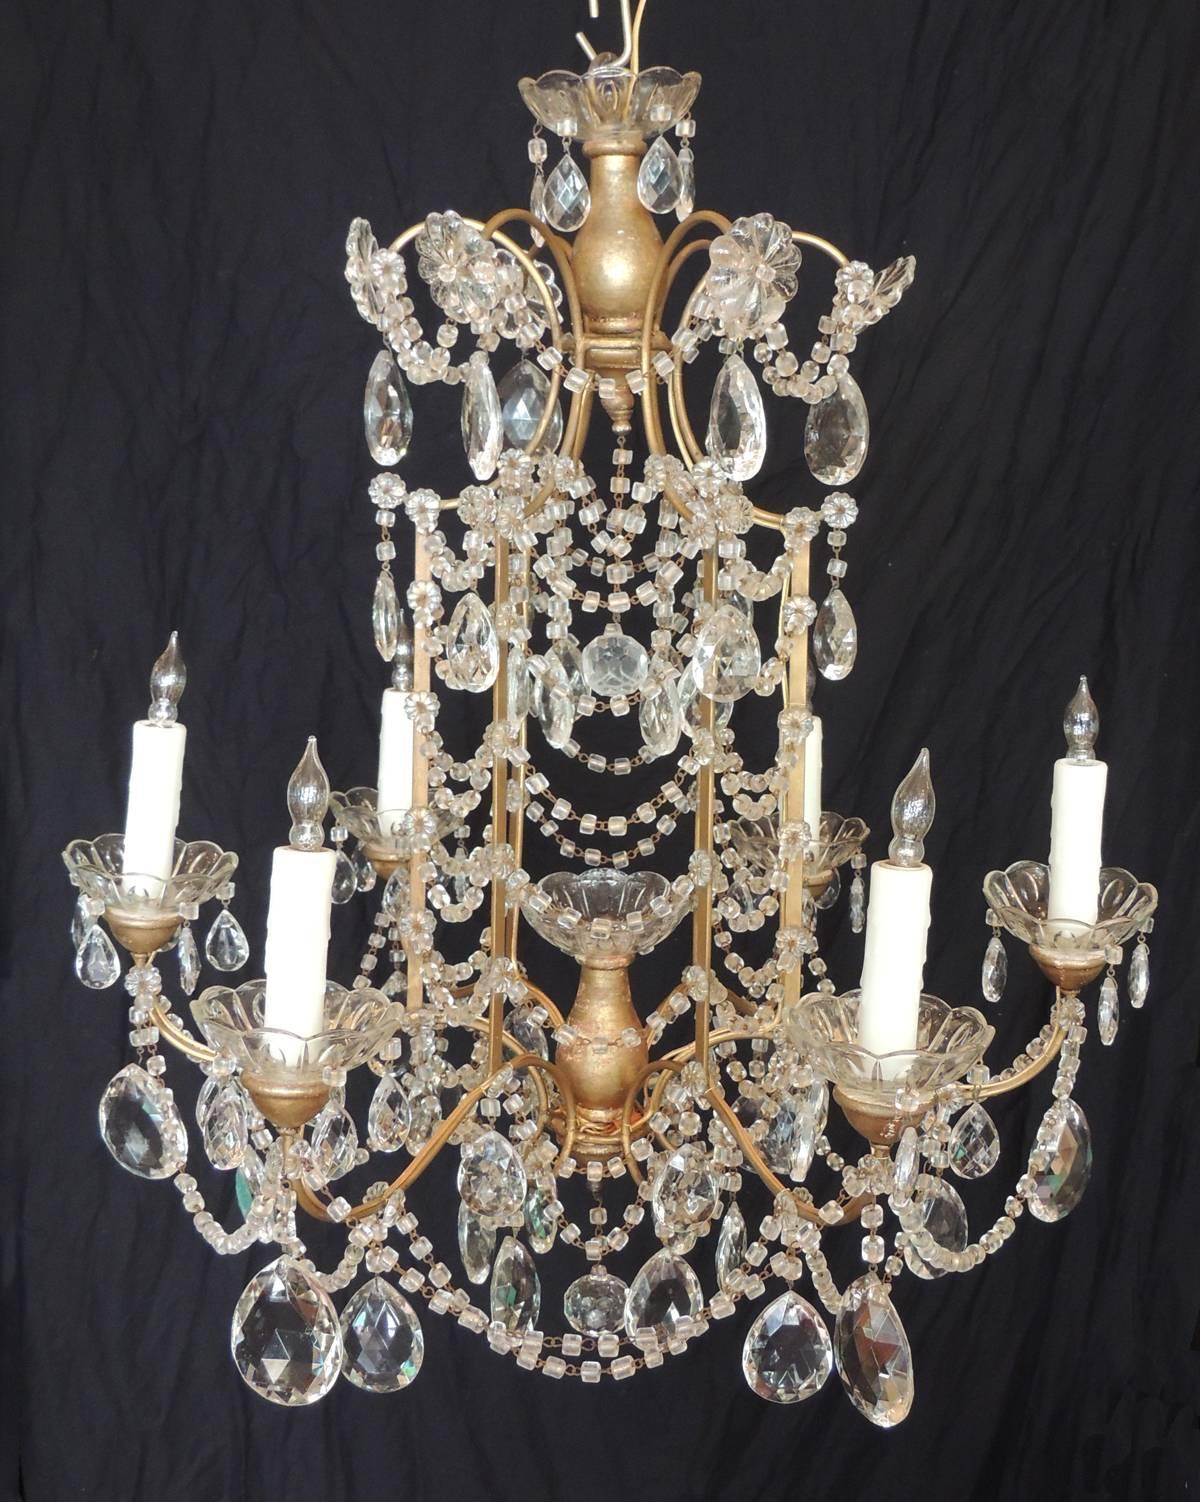 This chandelier was made in Venice in the early half of the 20th century, circa 1910. This chandelier features a top crest decorated with crystal swag and floral prisms surmounted on a pagoda form center. The chandelier has six arms decorated with